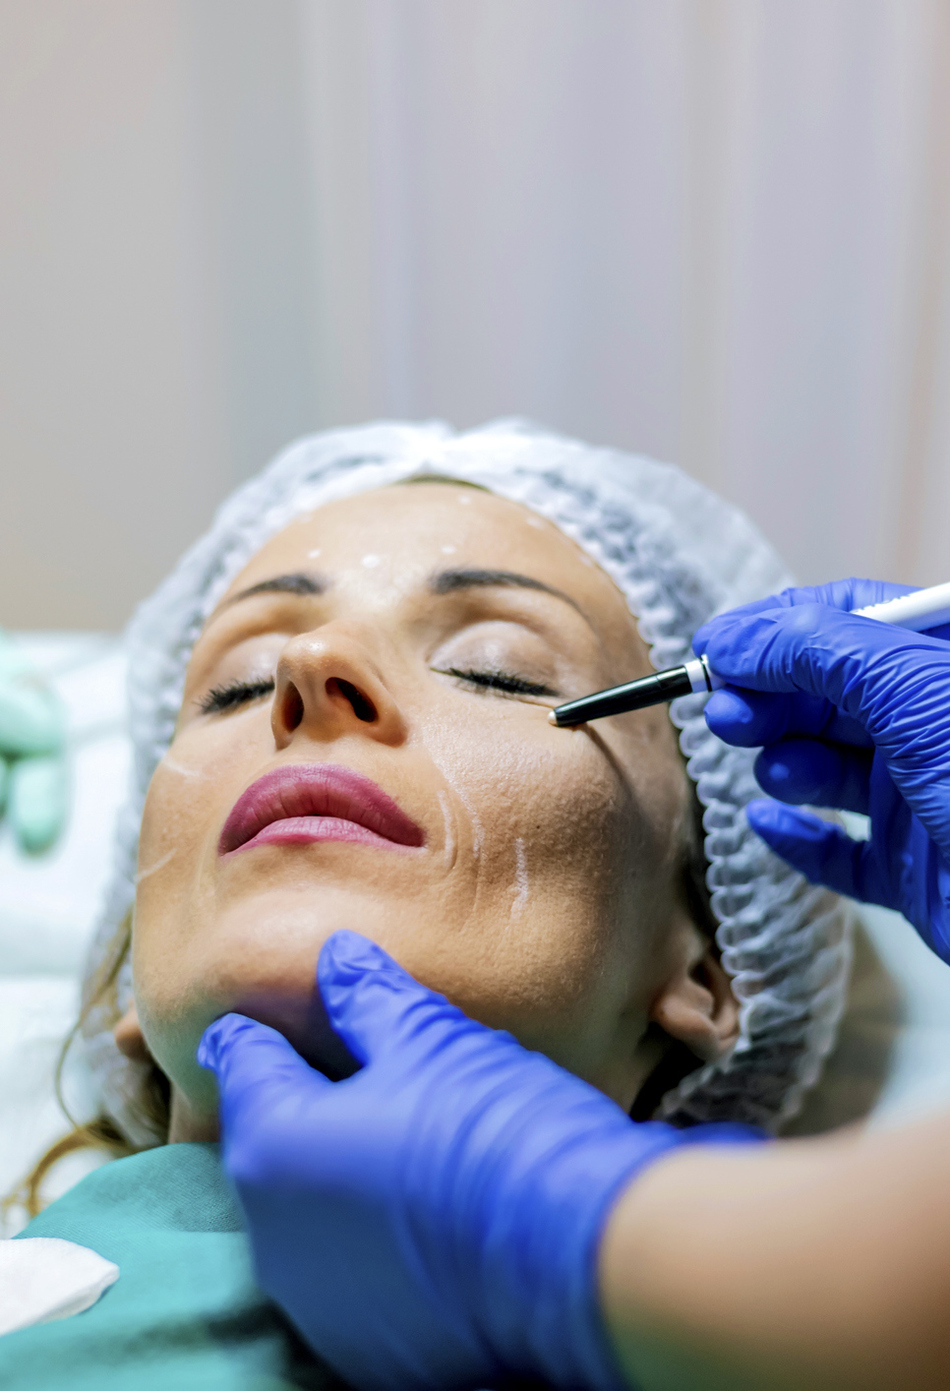 What is the Difference Between a Normal Facelift and a Mini Facelift?